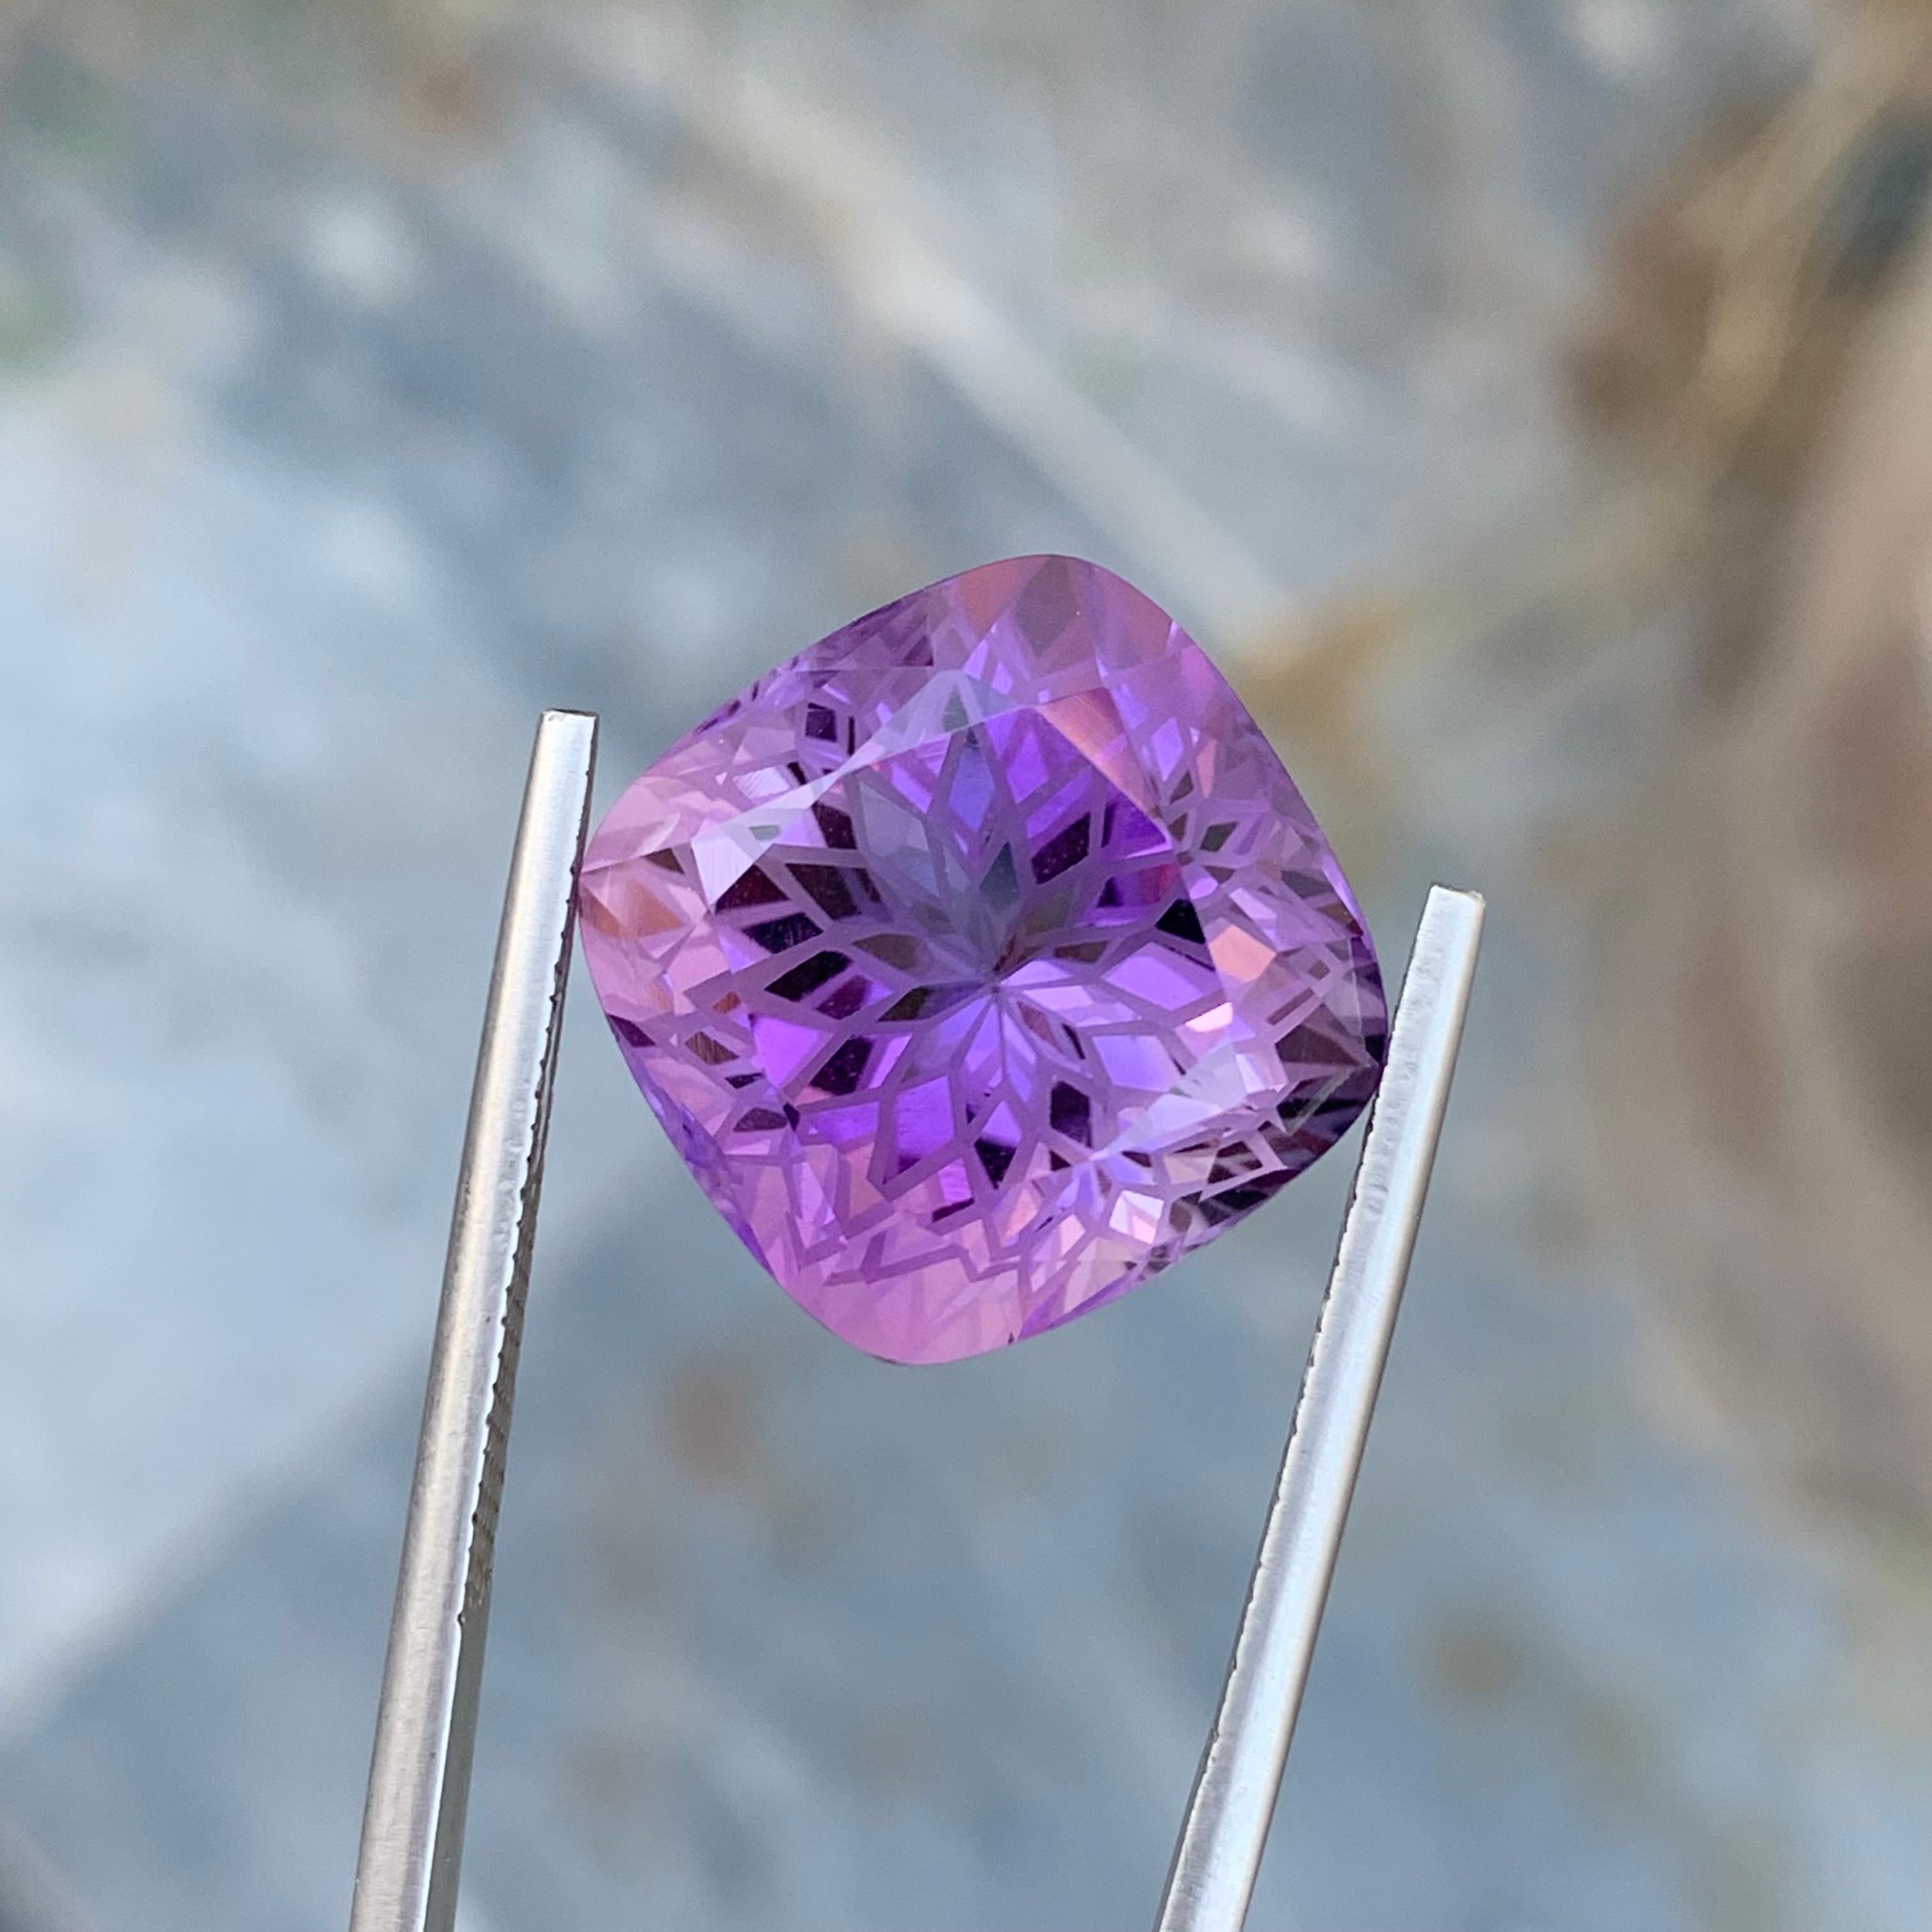 Loose Amethyst
Weight: 20.25 Carats
Dimension: 16.1 x 16.1 x 12.9 Mm
Colour: Purple
Origin: Brazil
Treatment: Non
Certificate: On Demand
Shape: Square 

Amethyst, a stunning variety of quartz known for its mesmerizing purple hue, has captivated